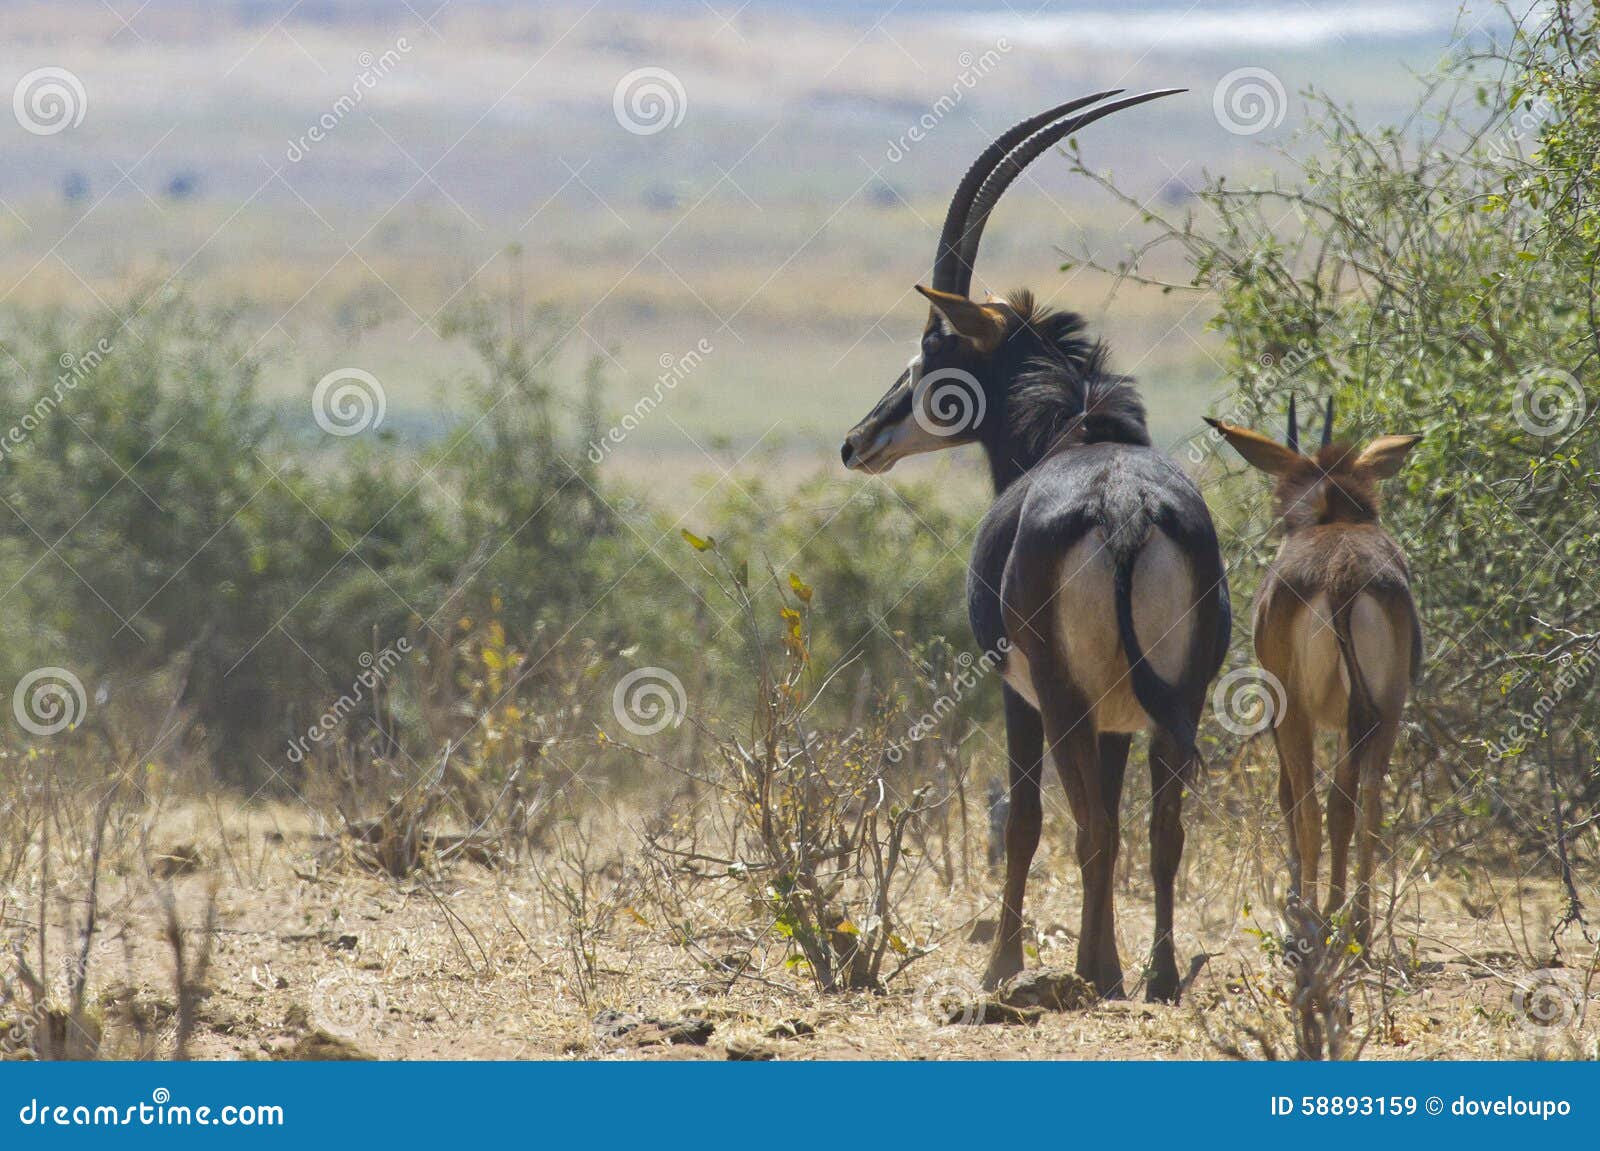 sable antelope with calf